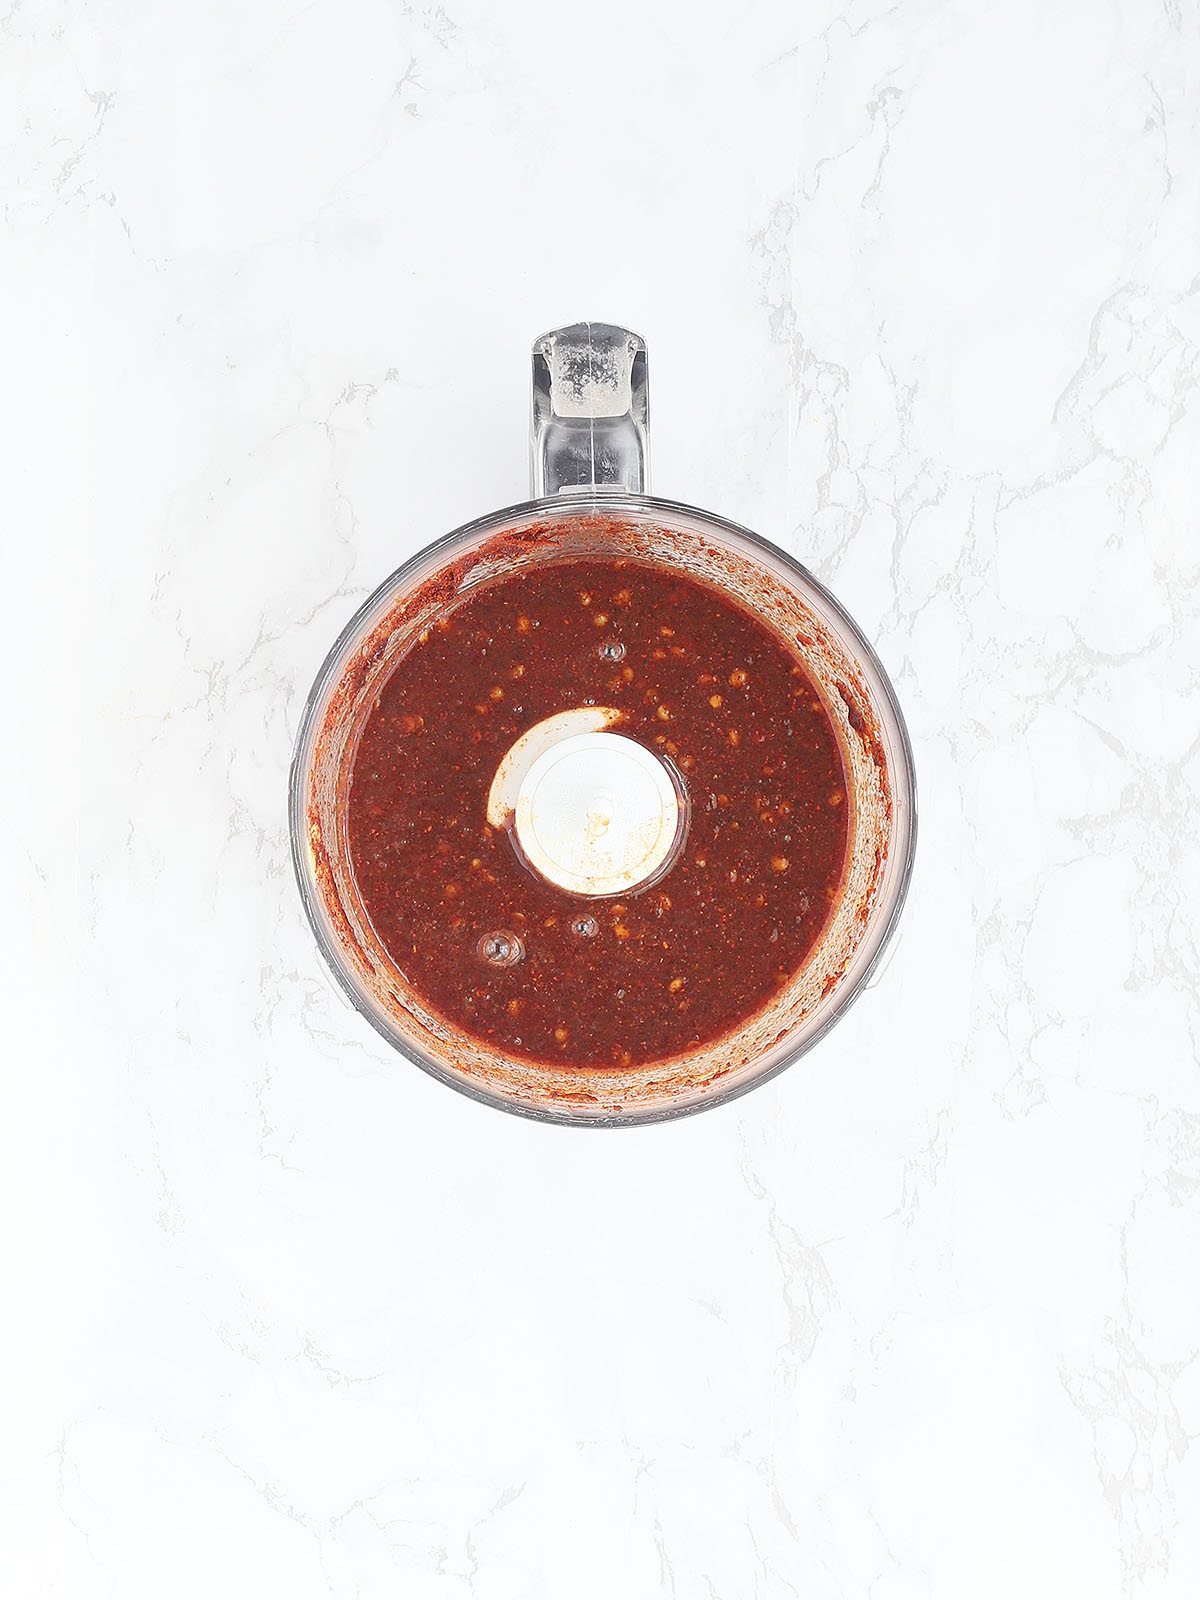 Honey chipotle sauce in a blender or food processor